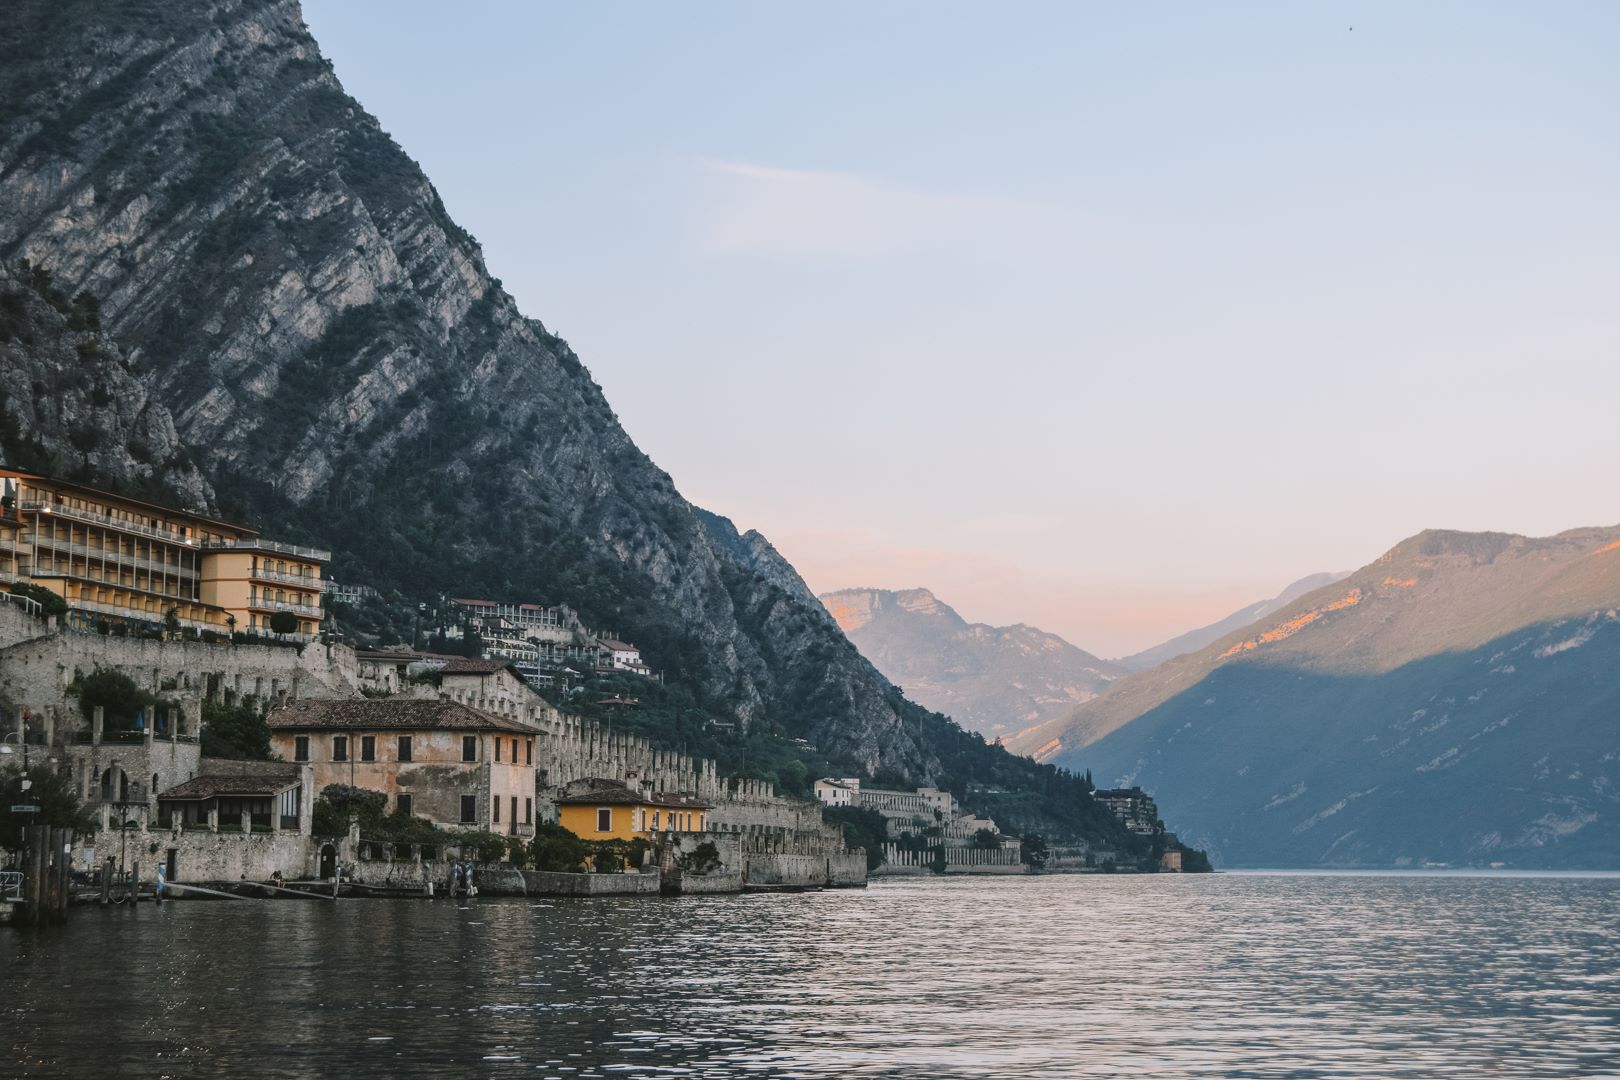 View of the mountains at sunset of Limone sul Garda